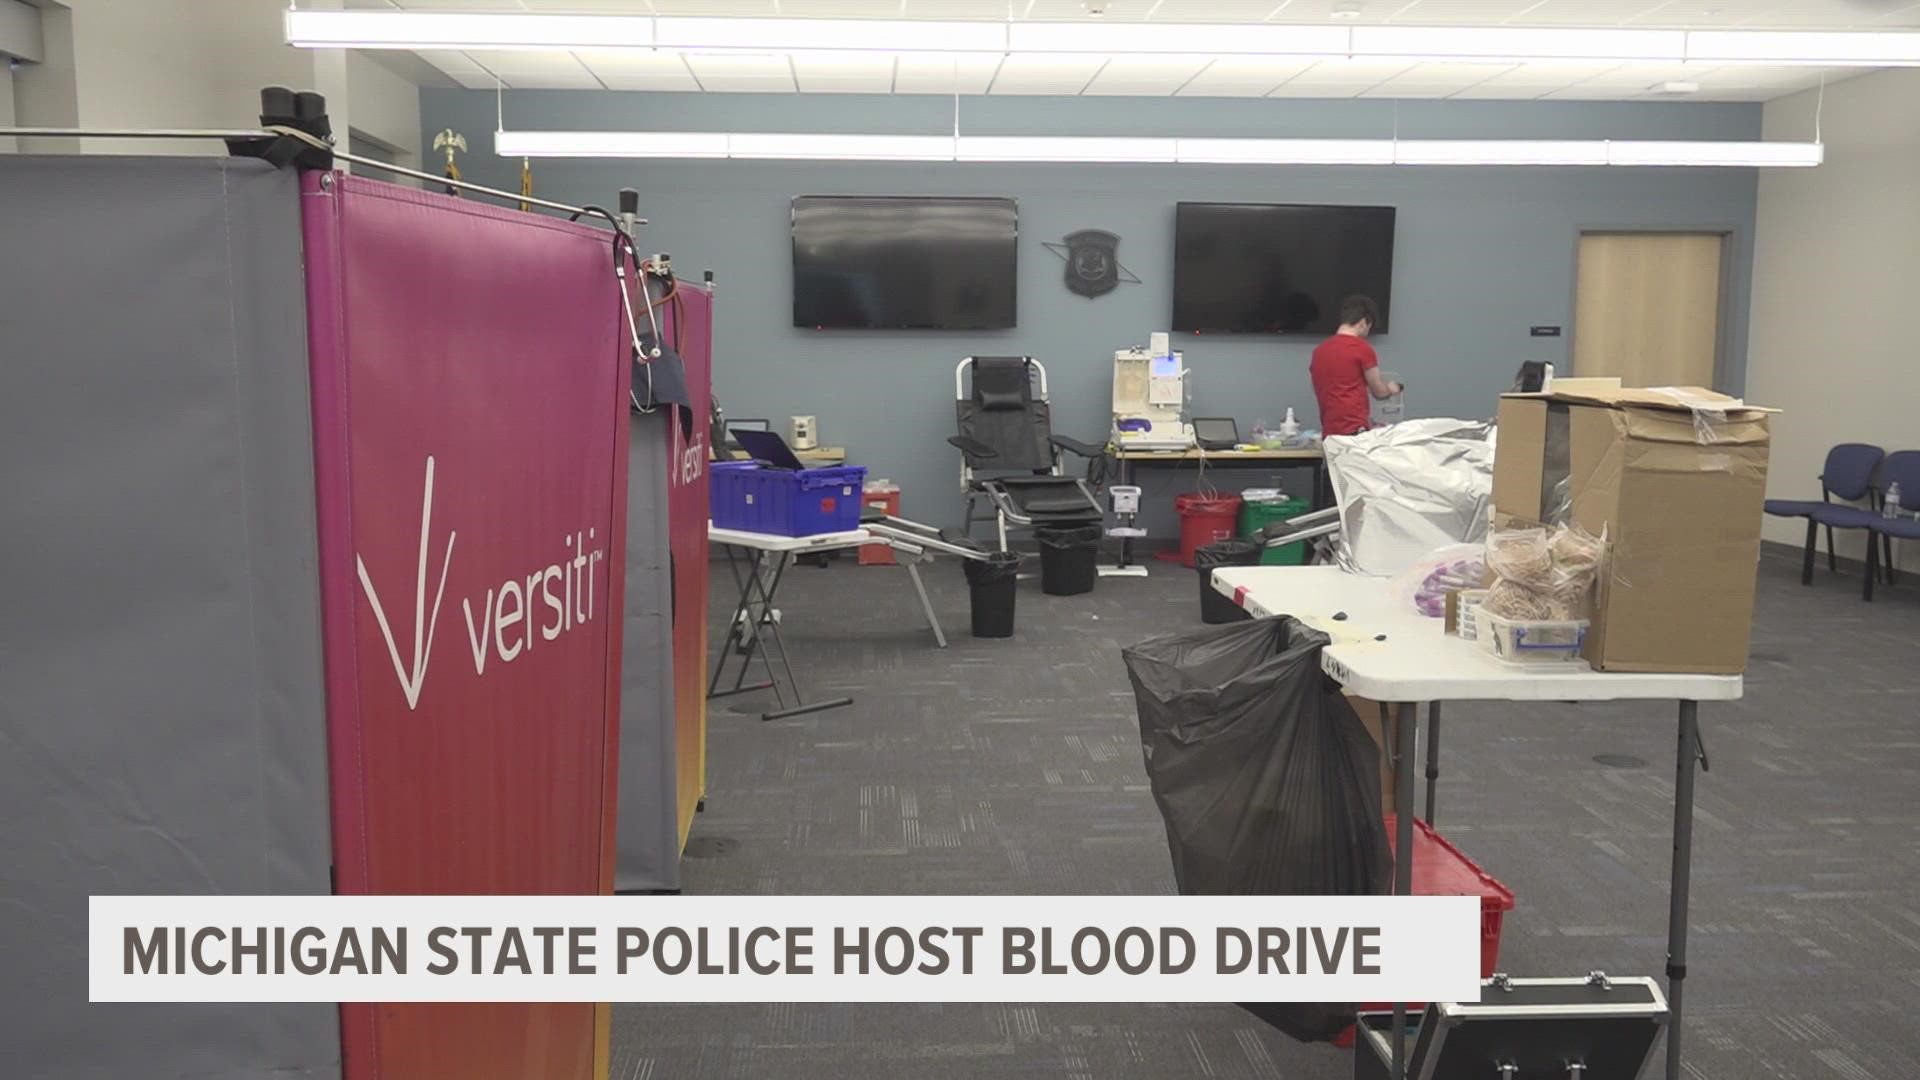 The agency's District 6 headquarters in Grand Rapids hosts three blood drives per year in partnership with Versiti Blood Centers of Michigan.